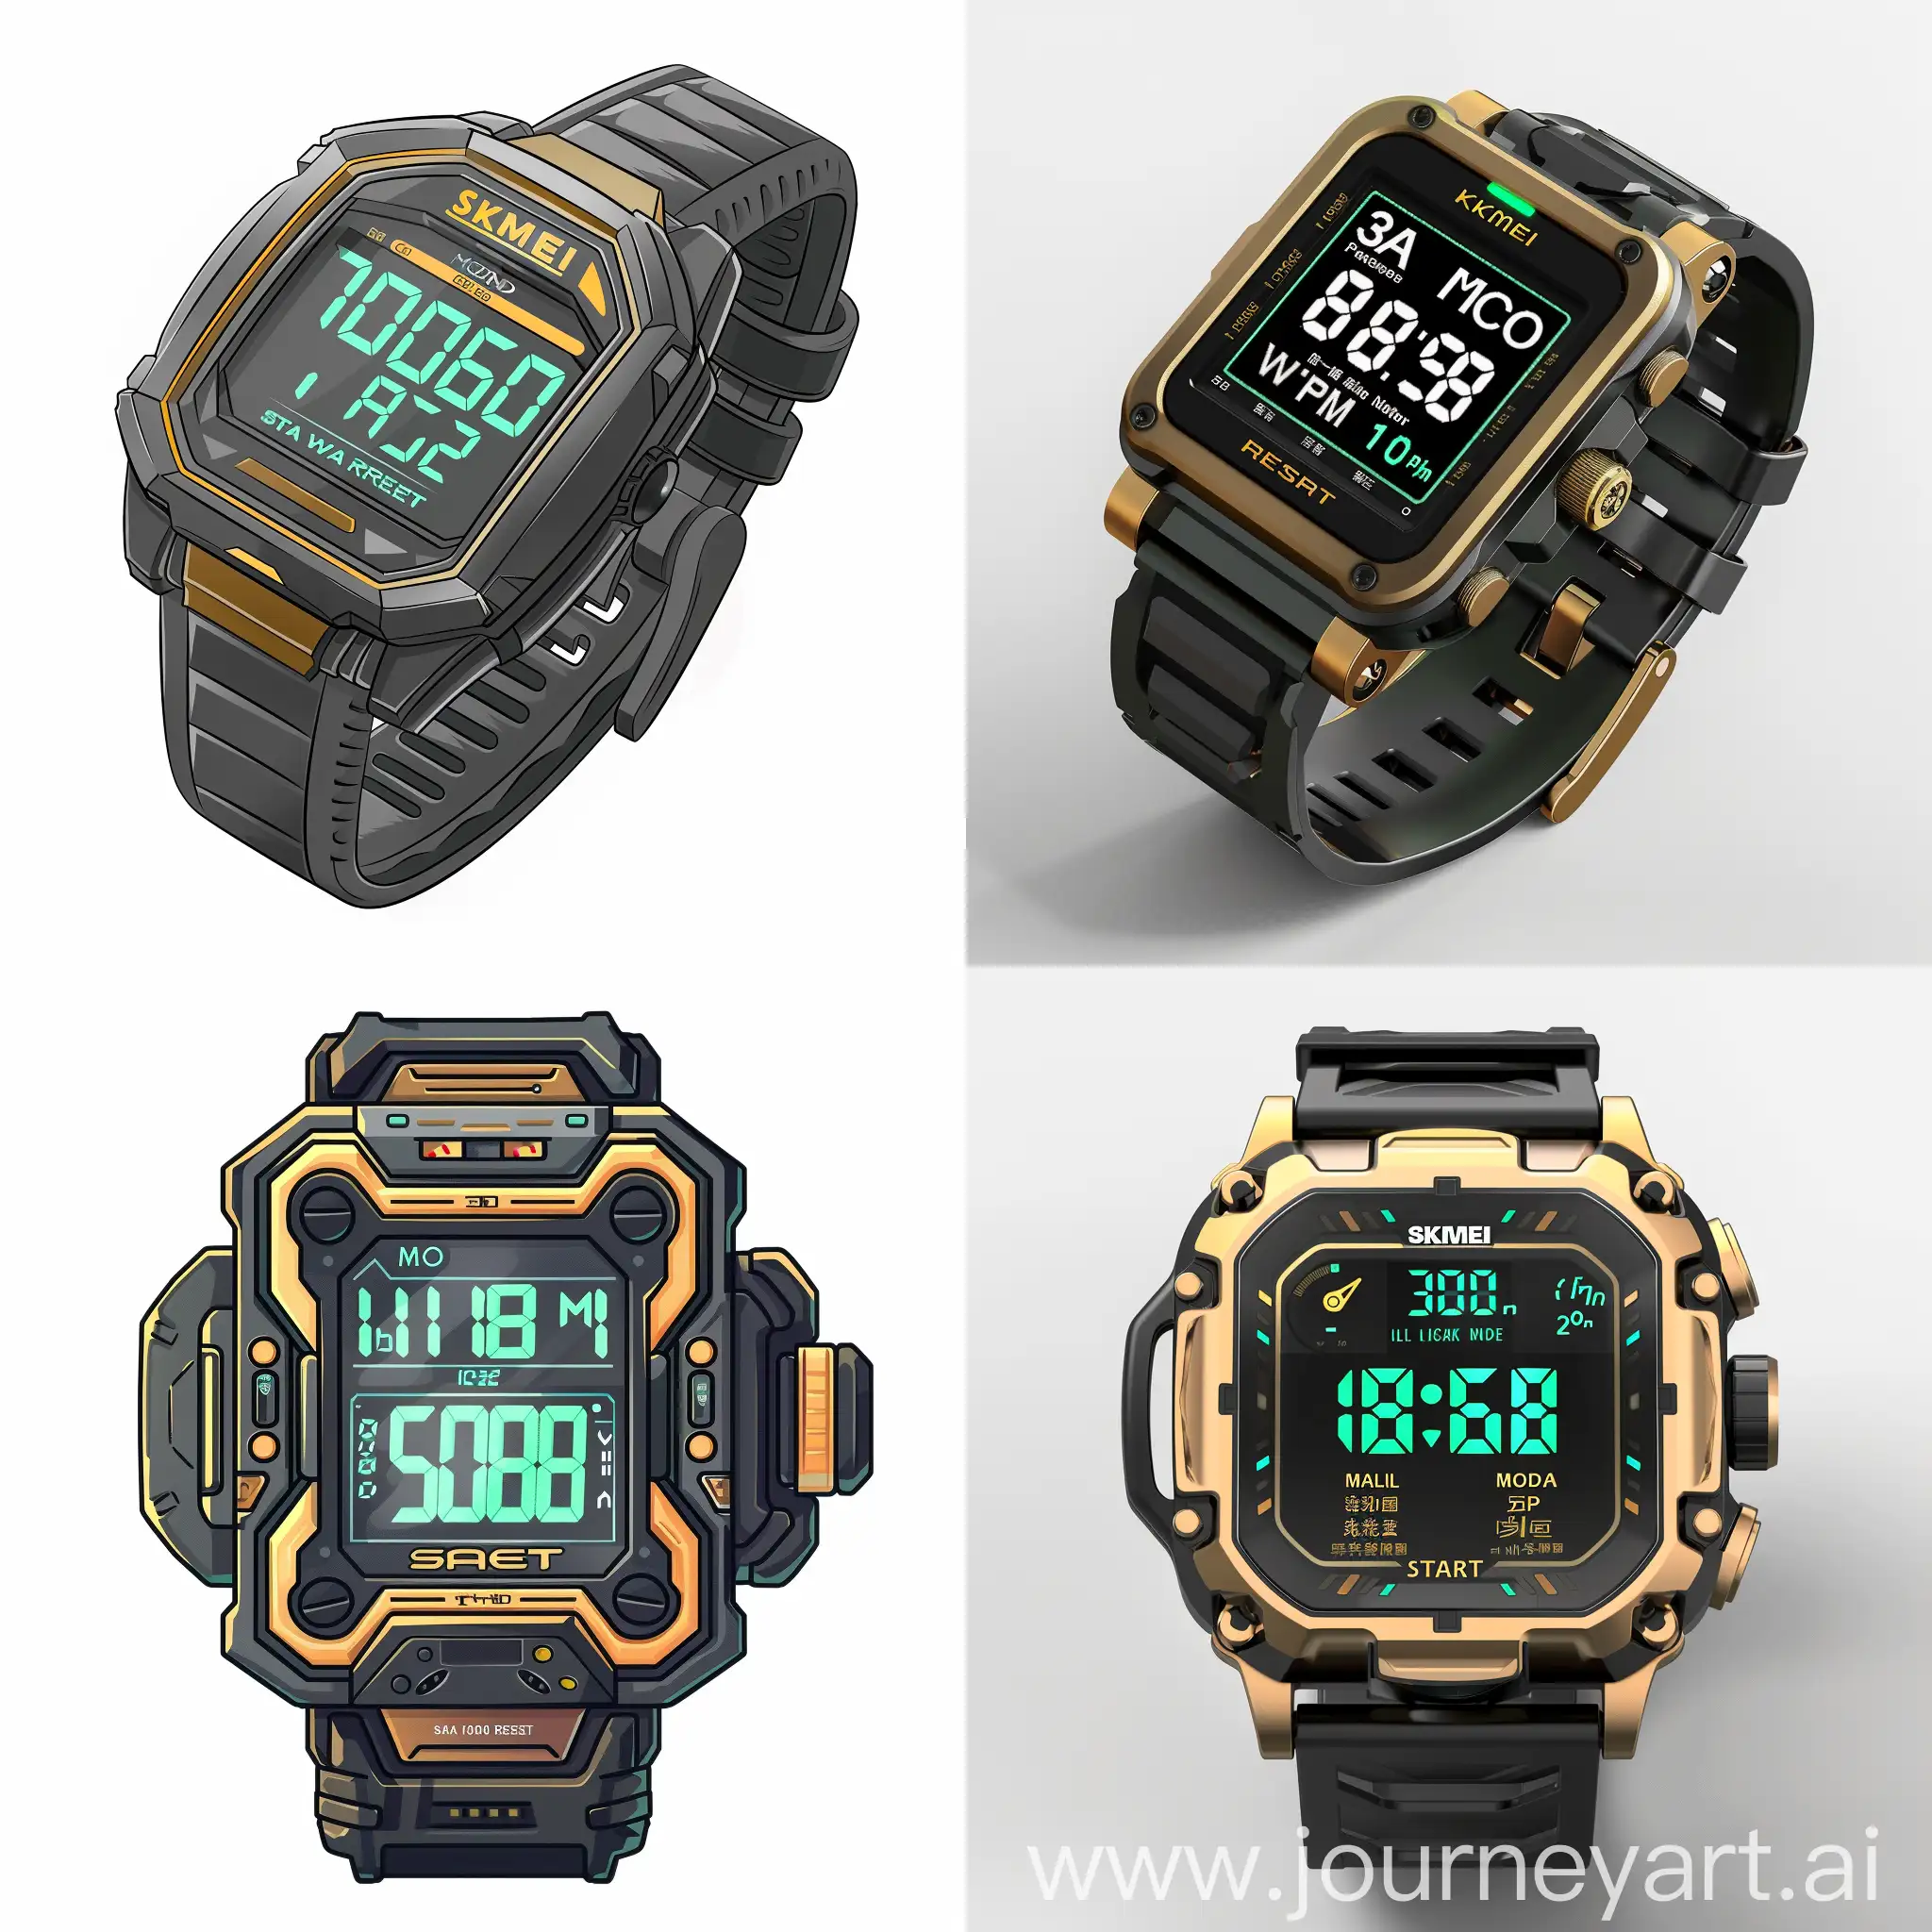 SKMEI-Digital-Wristwatch-with-1050-PM-Time-Display-and-Alarm-Icon